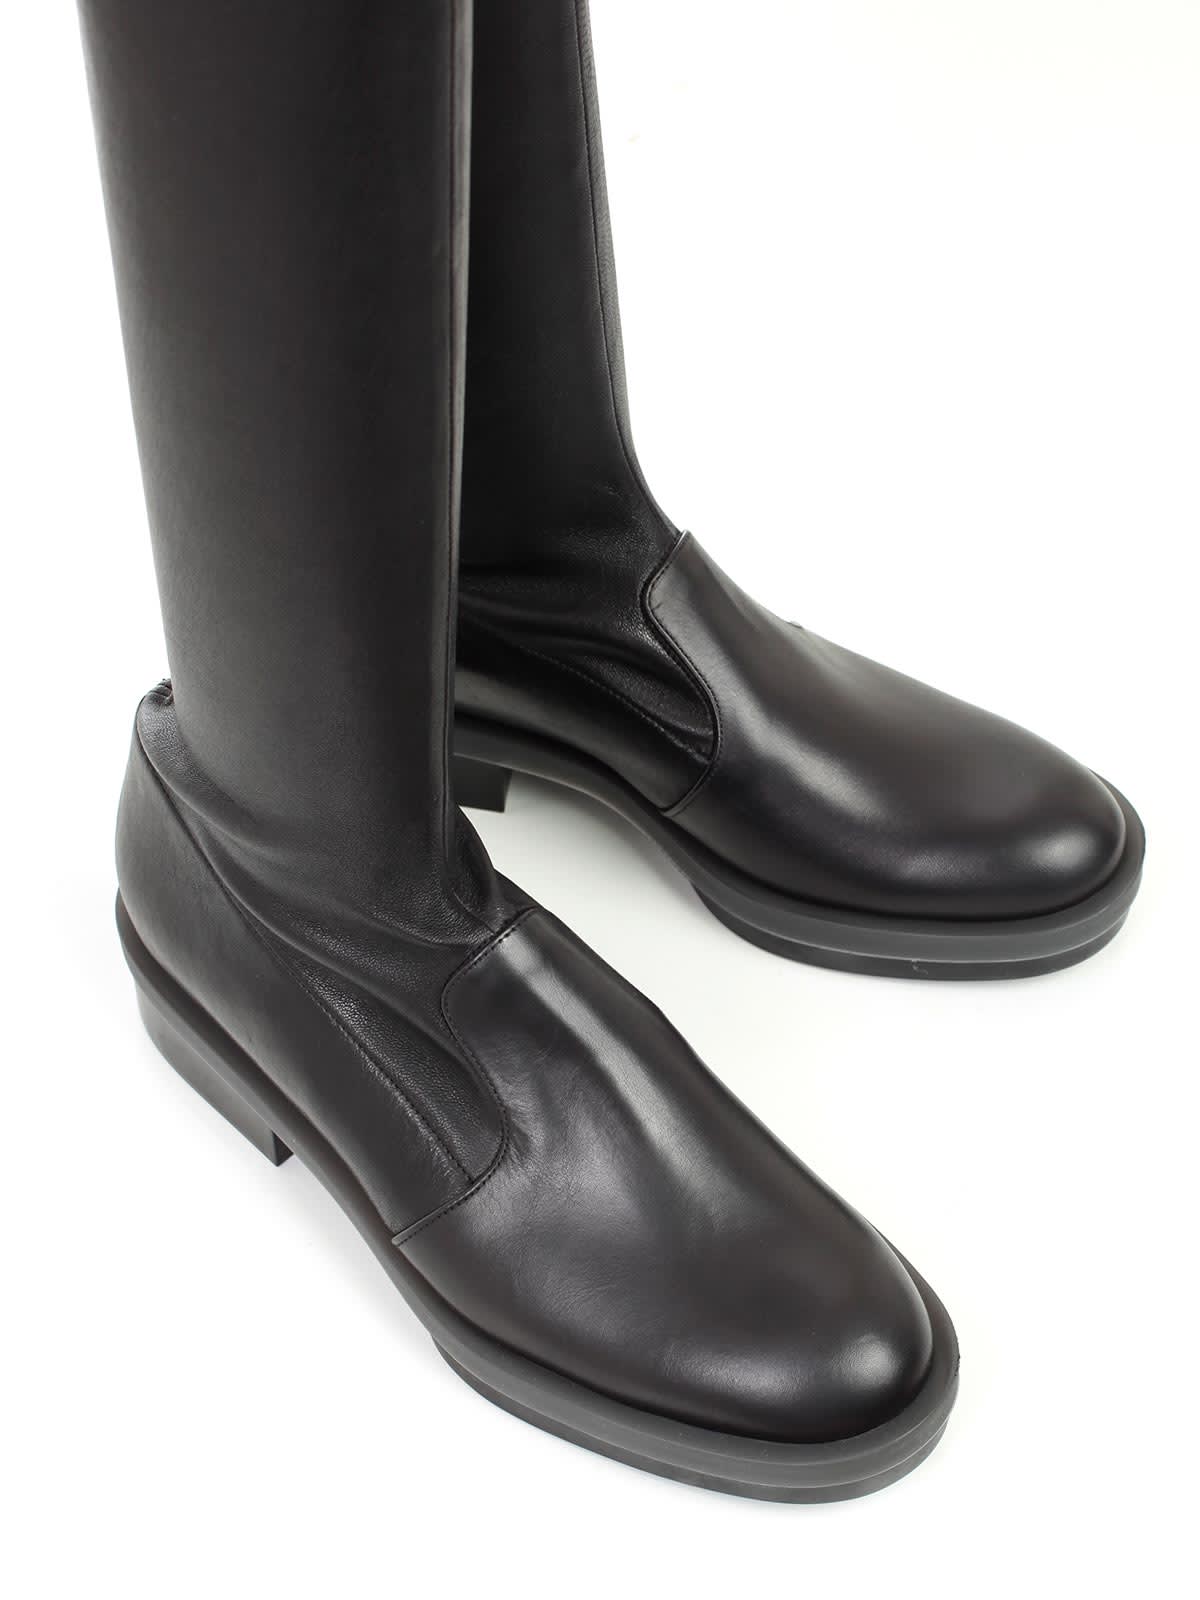 clergerie boots